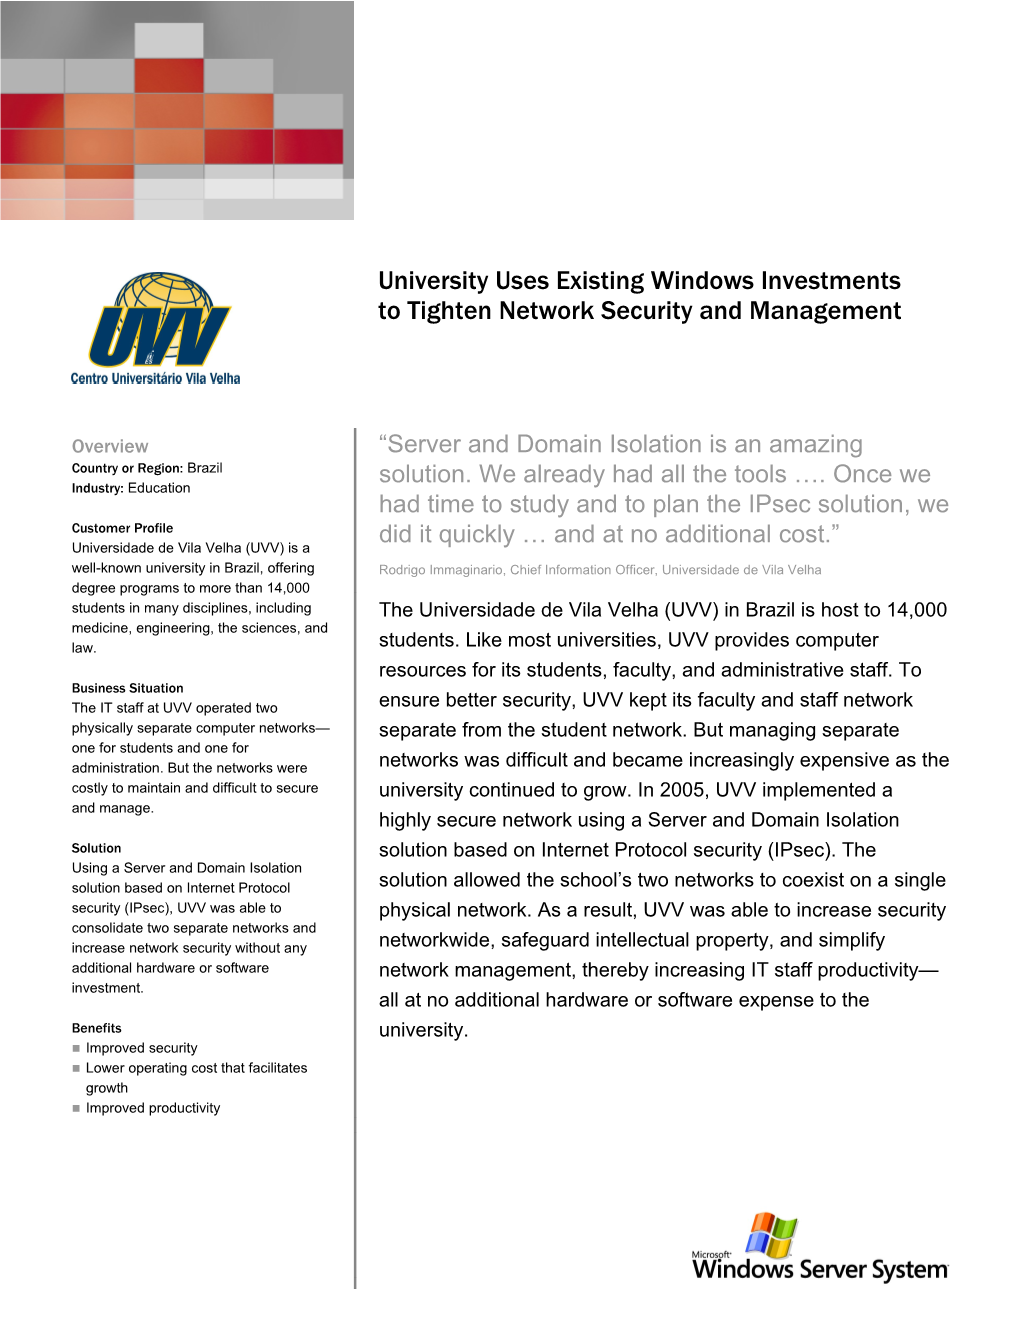 University Uses Existing Windows Investments to Tighten Network Security and Management